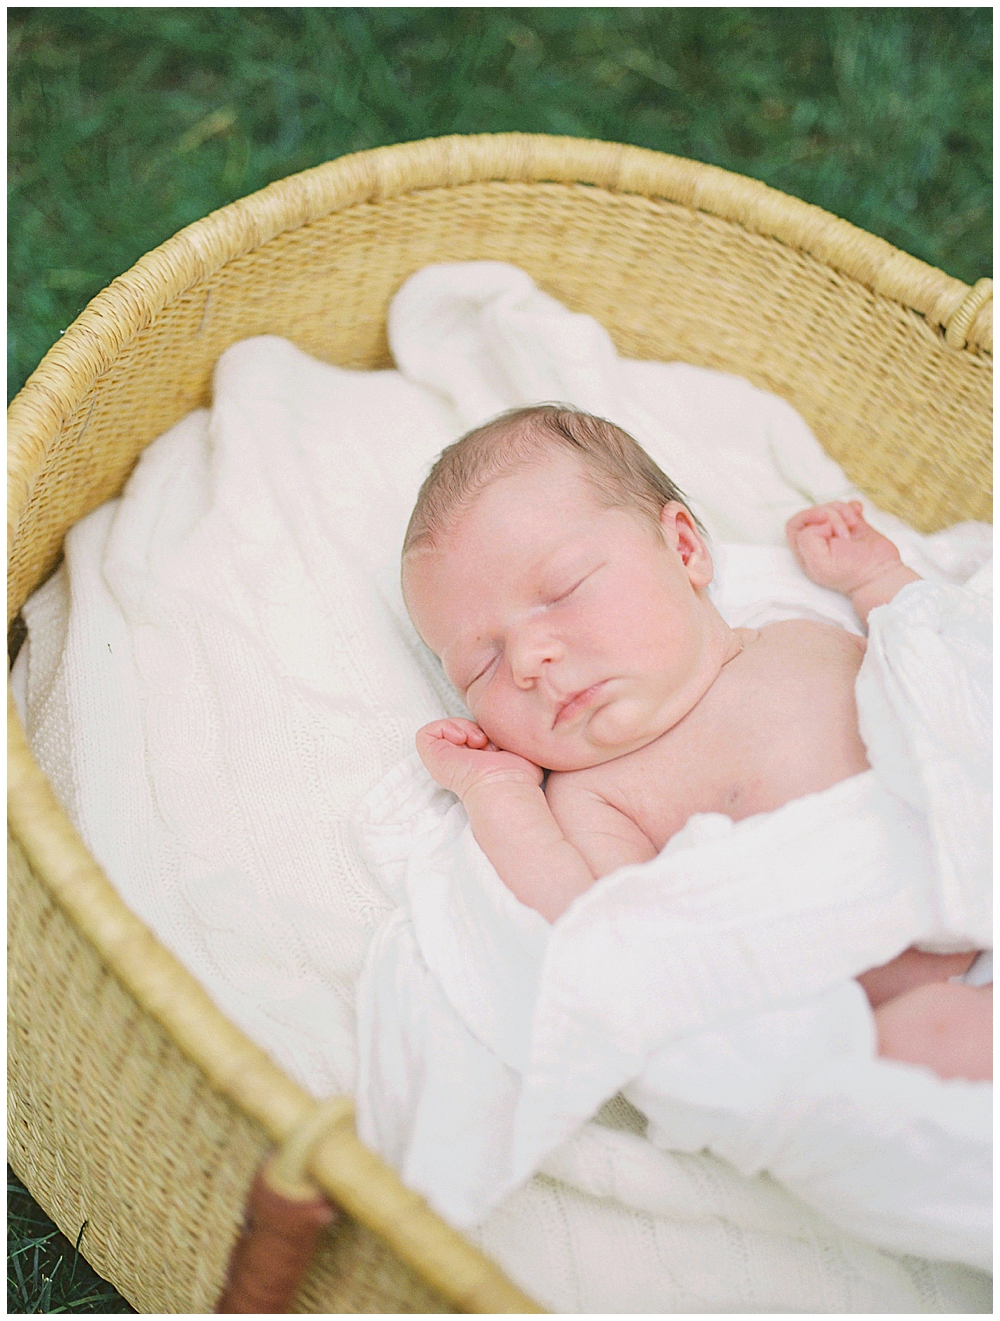 Newborn in a Moses basket during an outdoor studio newborn session